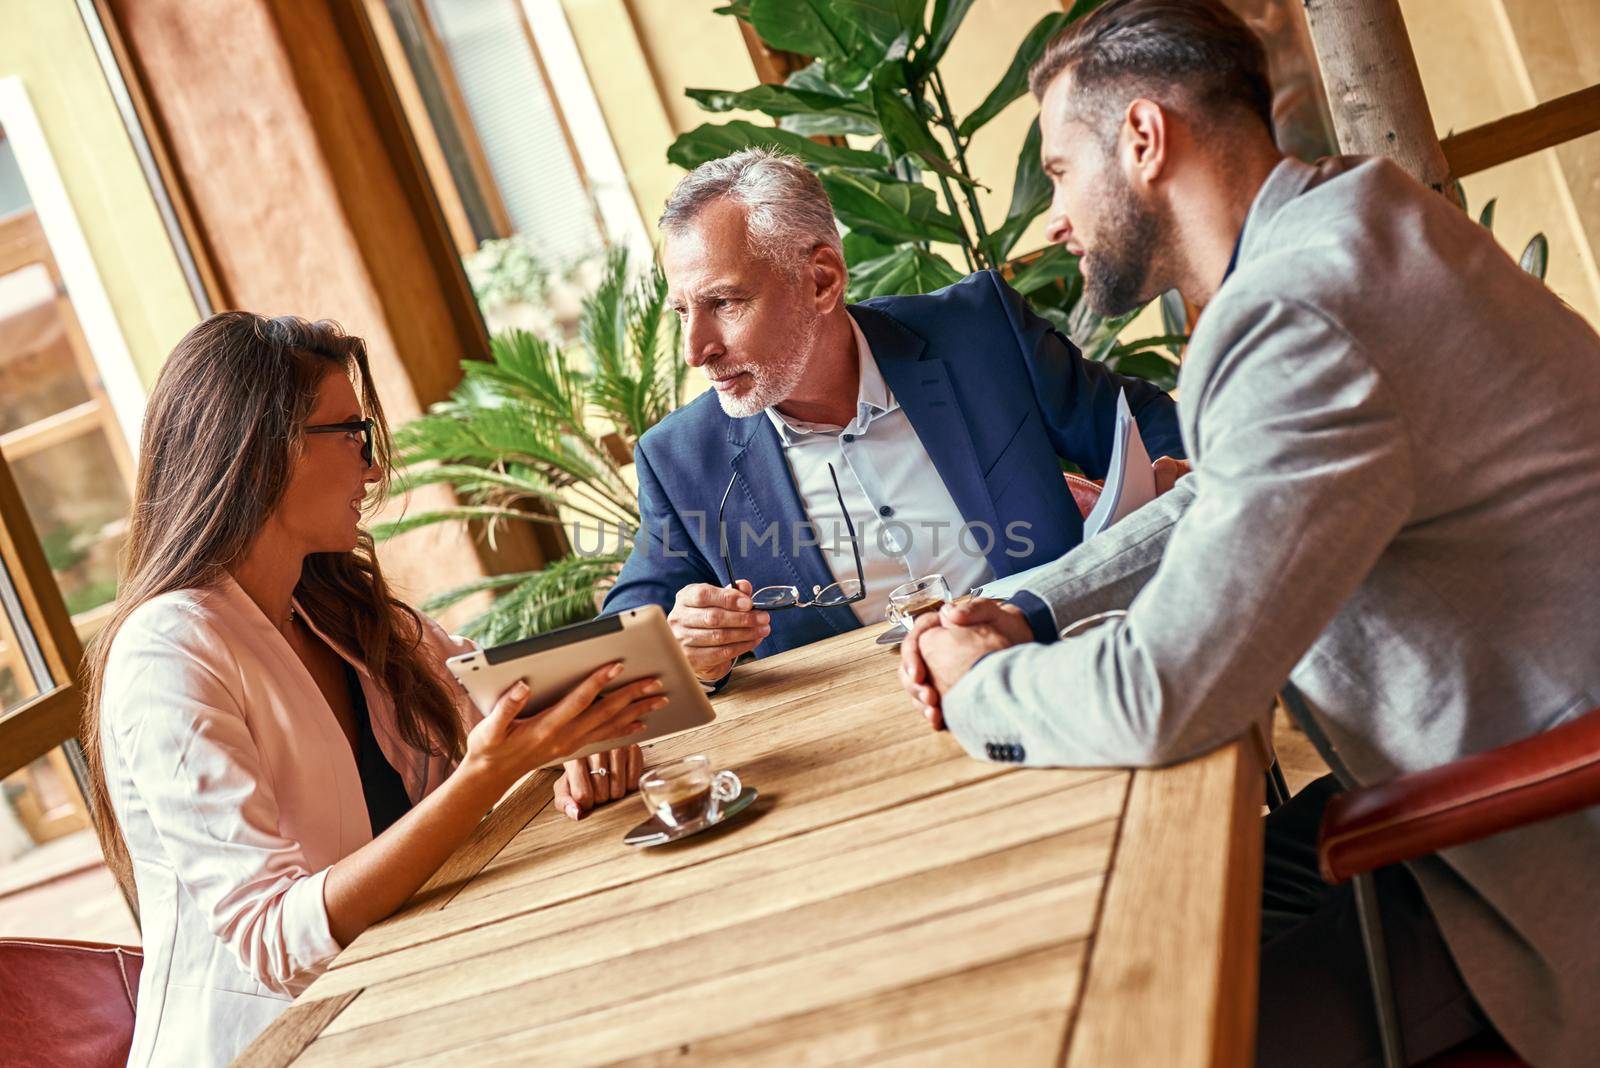 Business lunch. Three people in the restaurant sitting at table discussing project woman holding digital tablet explaining ideas looking at senior man smiling cheerful by friendsstock